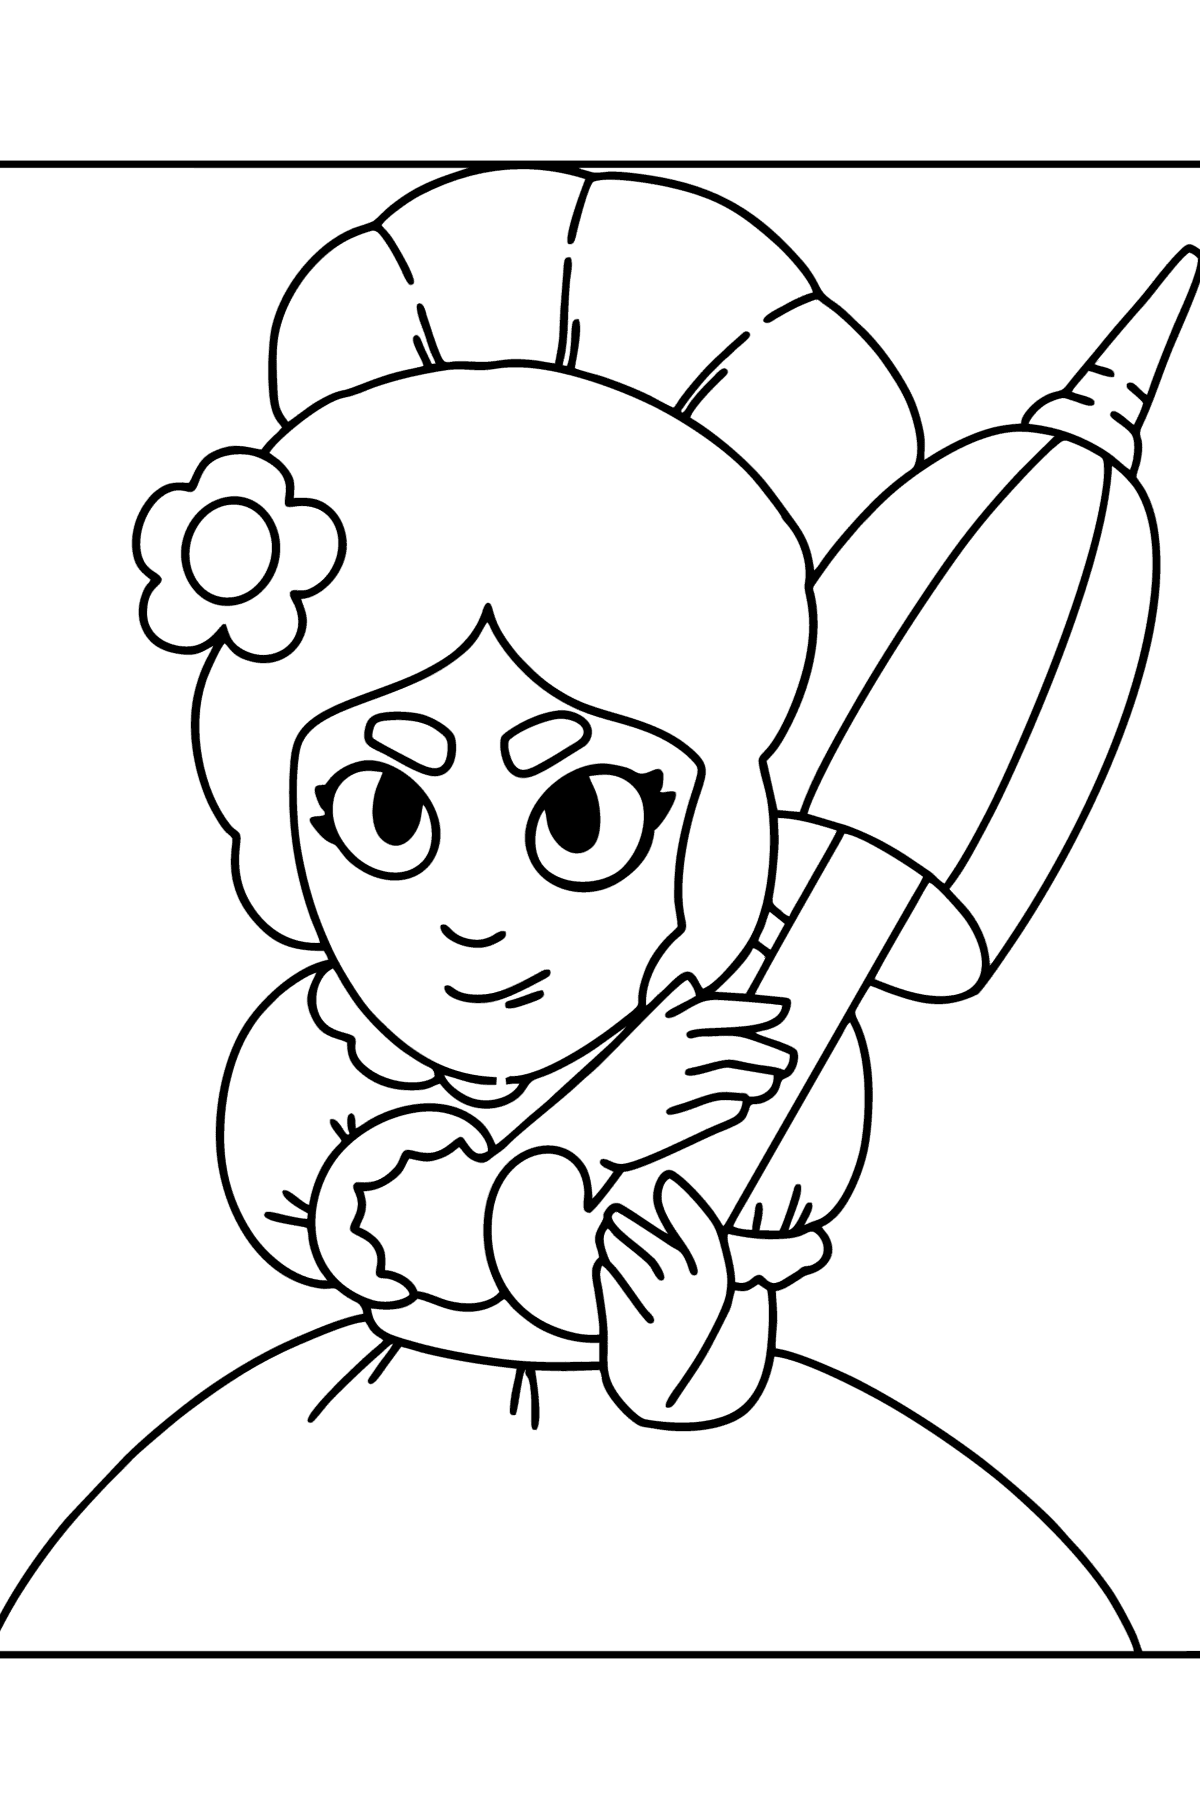 Brawl Stars Piper coloring page ♥ Online and Print for Free!